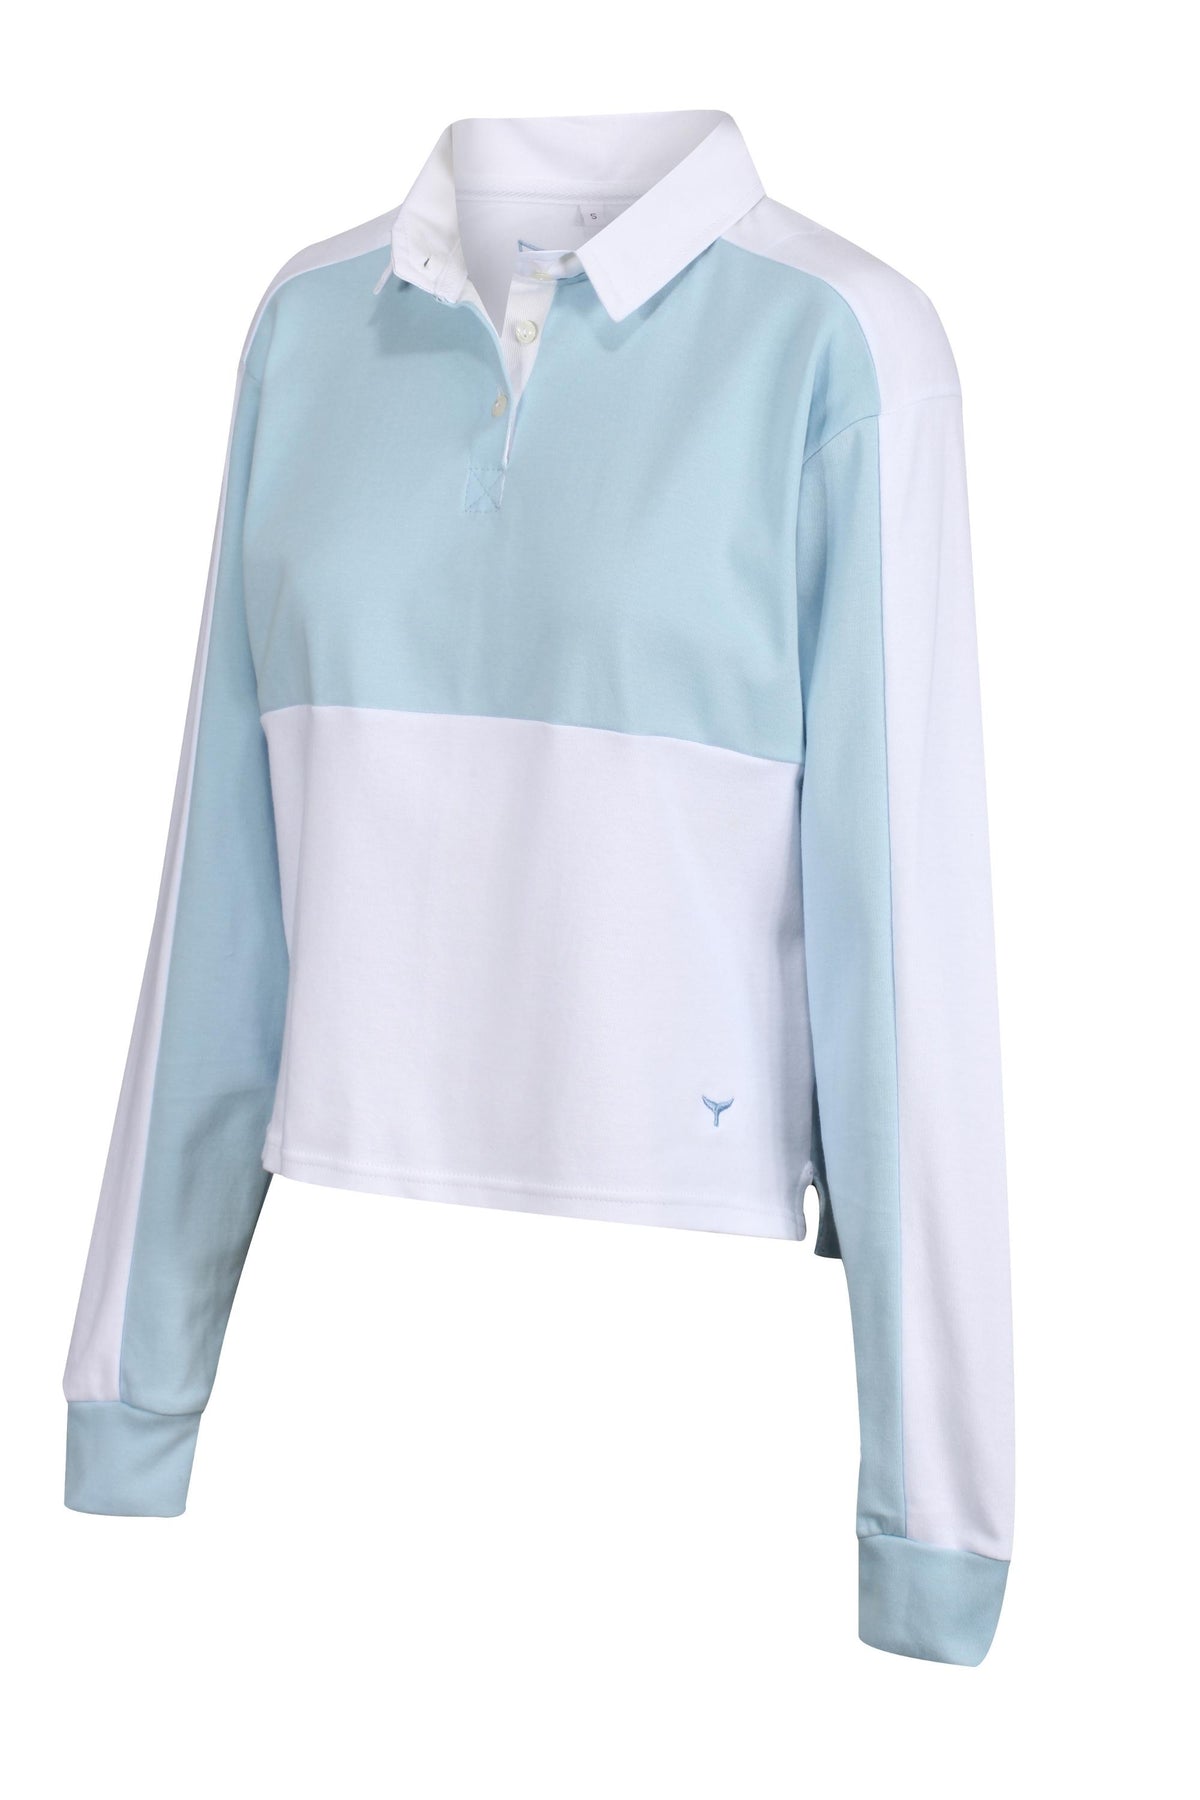 Burford Rugby Shirt - Blue - Whale Of A Time Clothing